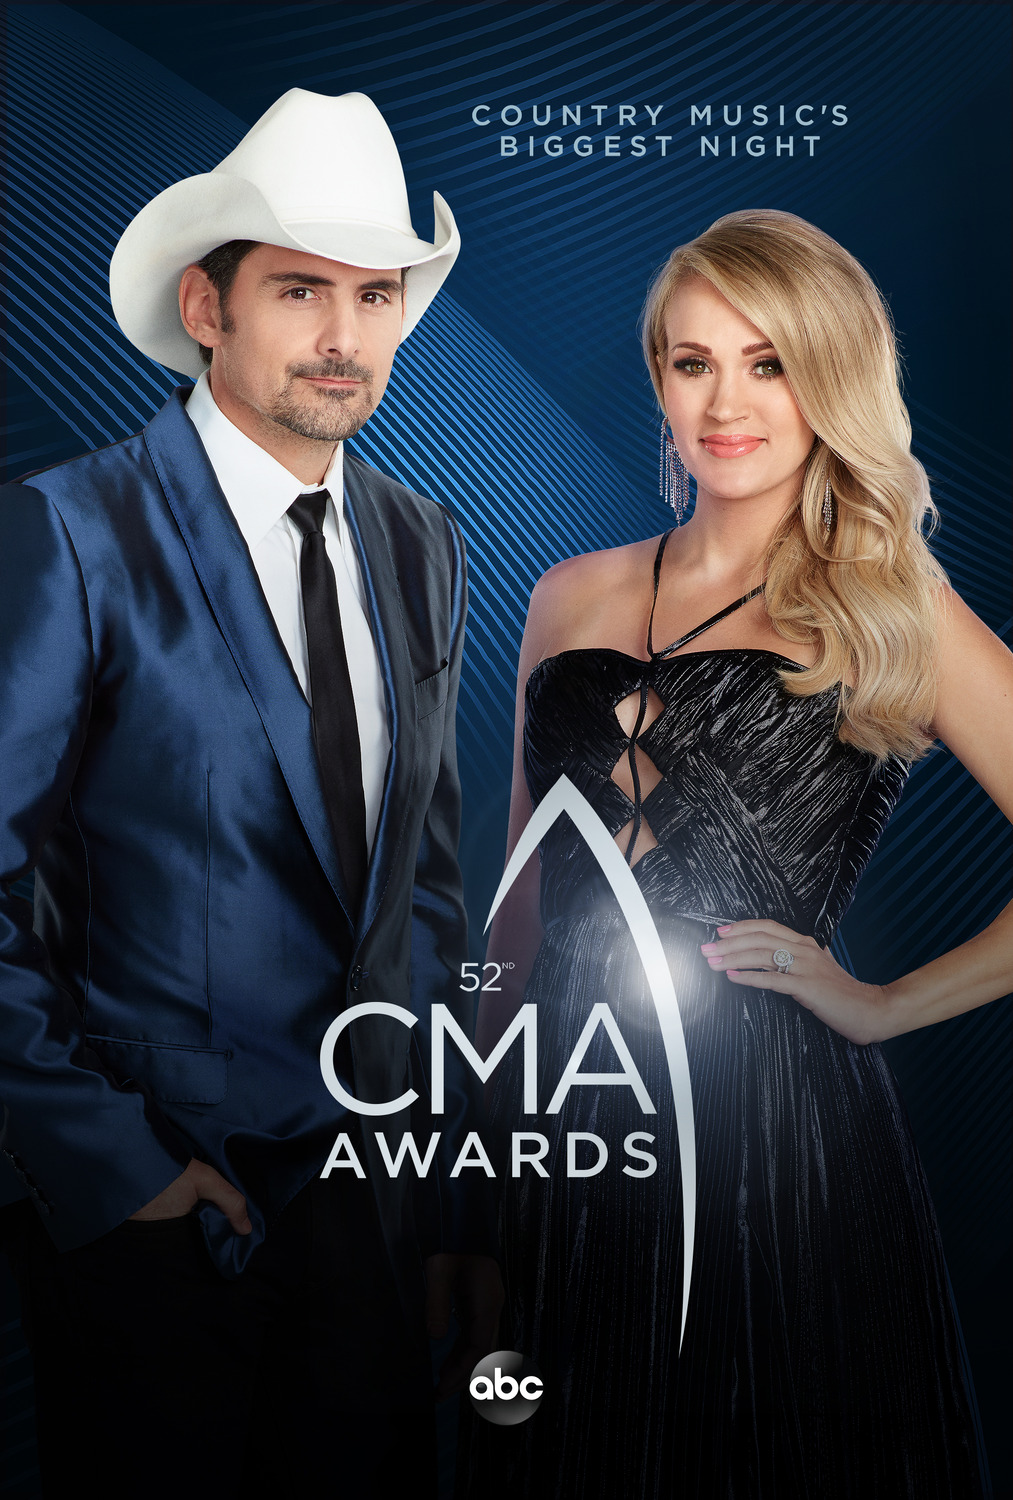 Extra Large TV Poster Image for CMA Awards (#6 of 7)